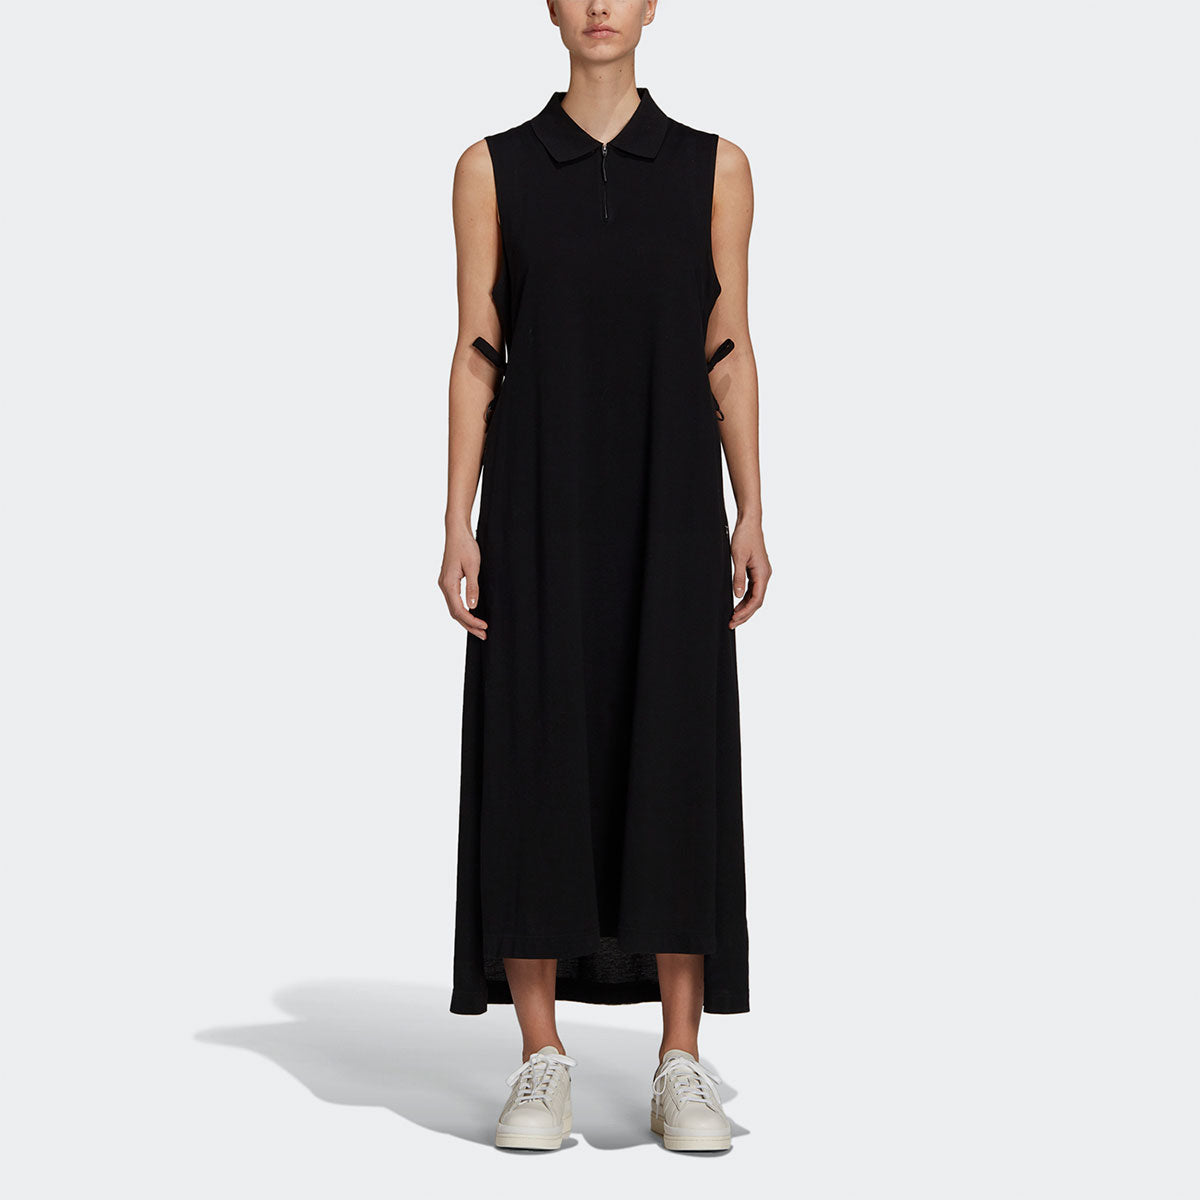 W CLASSIC PIQUE TANK DRESS - Why are you here?